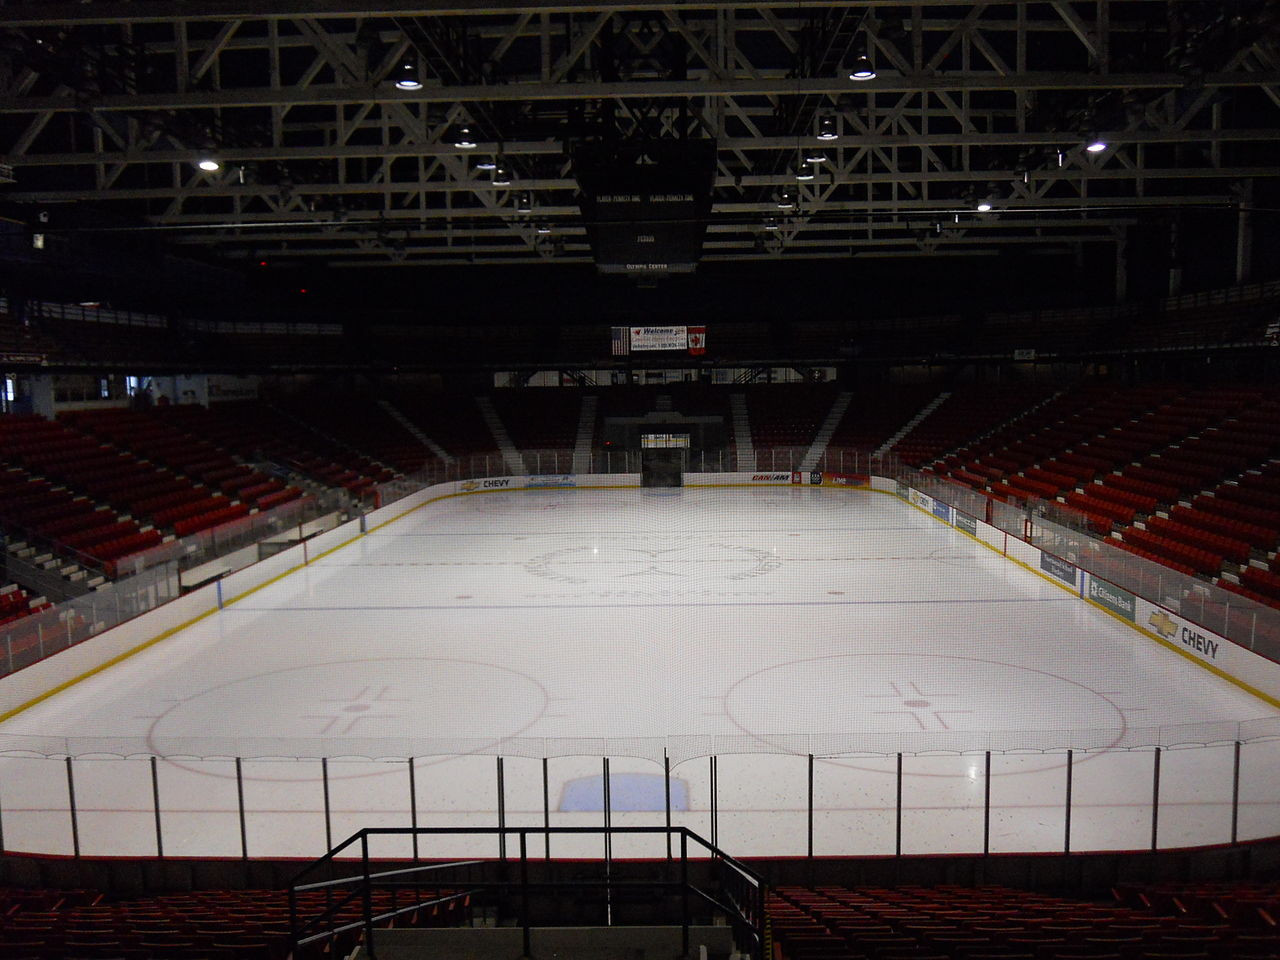 Lake Placid will host the 2023 Winter Universiade, including ice hockey at the Herb Books Arena, venue for the US ice hockey victory at the 1980 Winter Olympic Games @Wikipedia